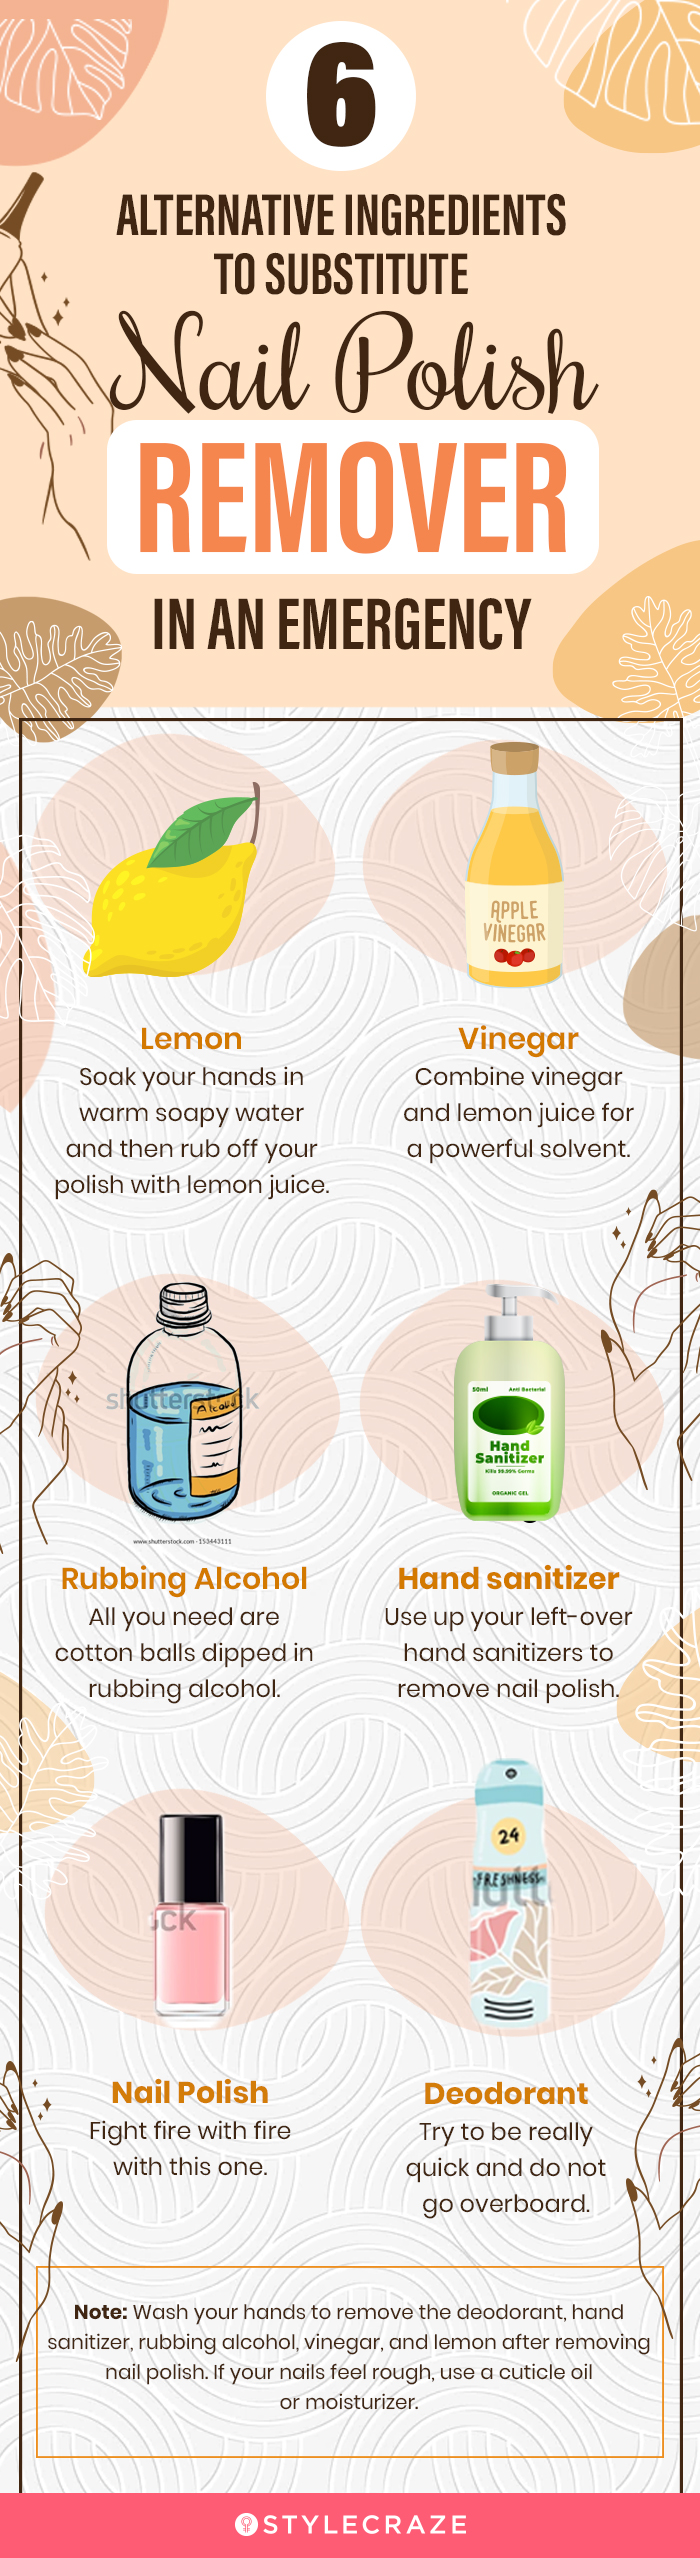 6 alternative ingredients to substitute nail polish remover in an emergency [infographic]